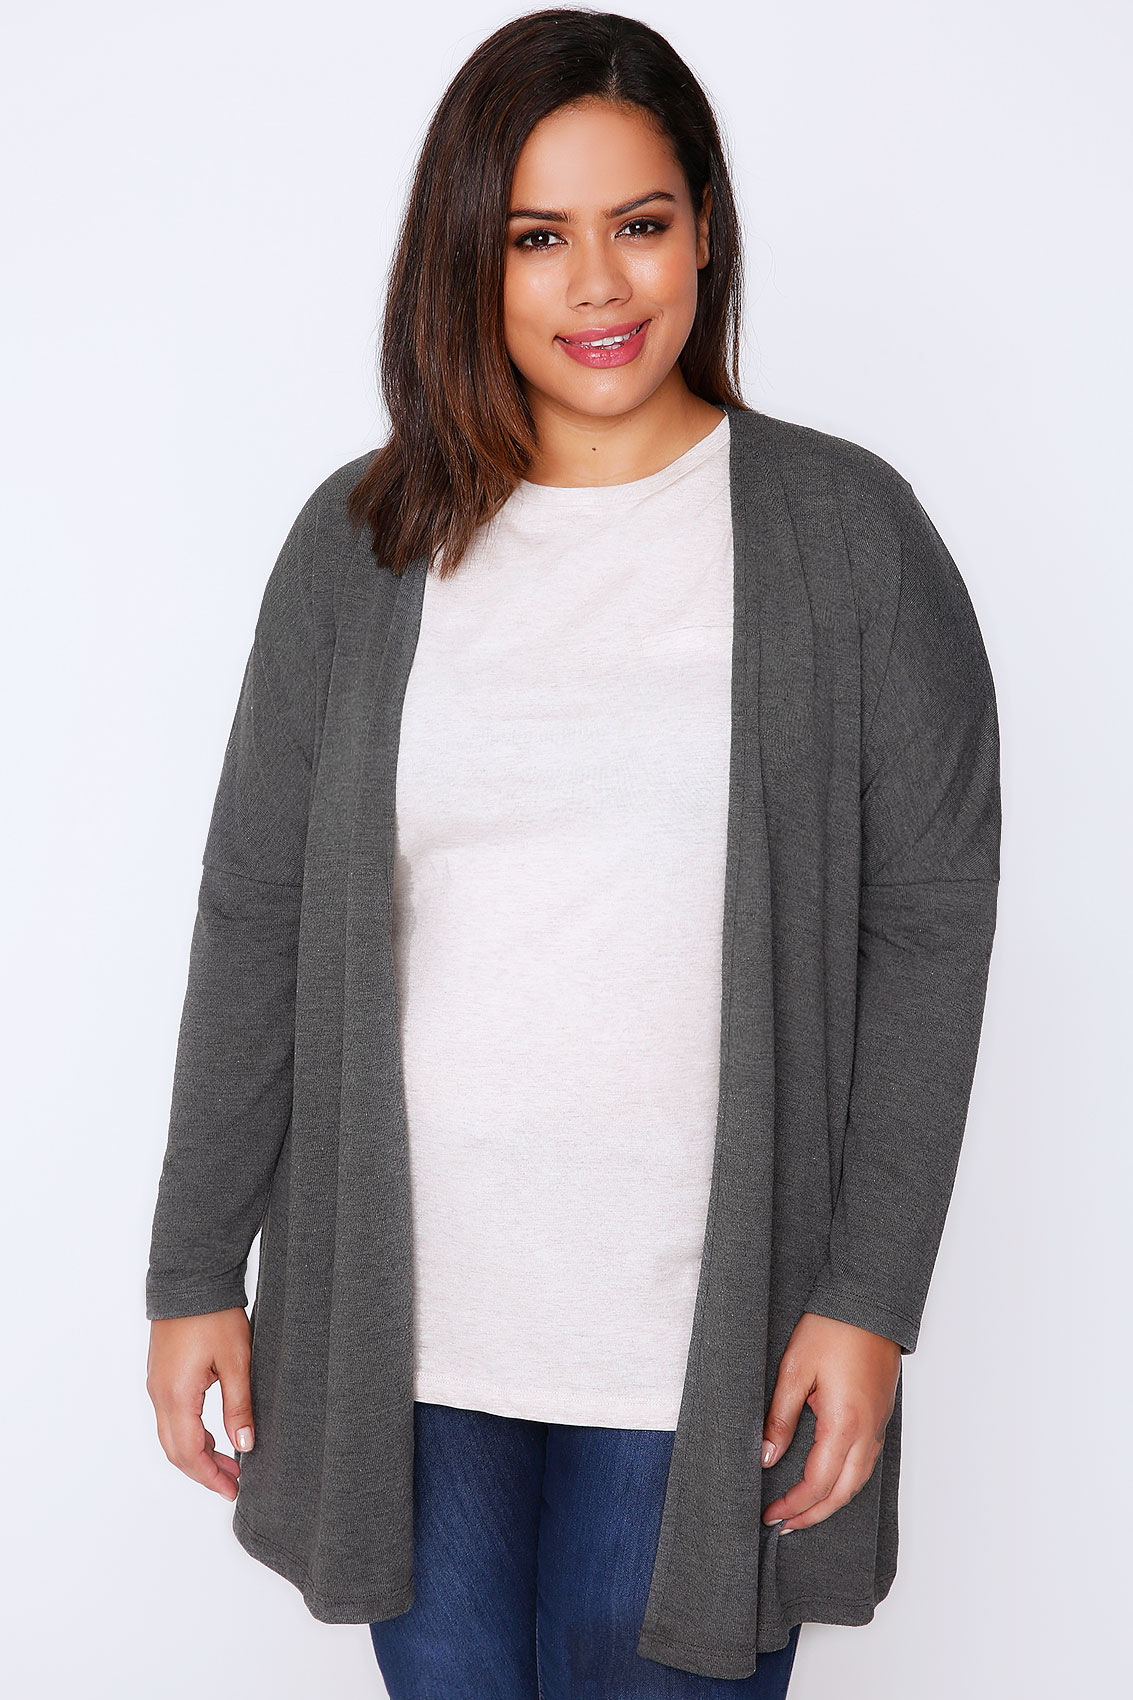 Grey Marl Long Sleeved Soft Knit Cardigan Plus Size 16 to 36